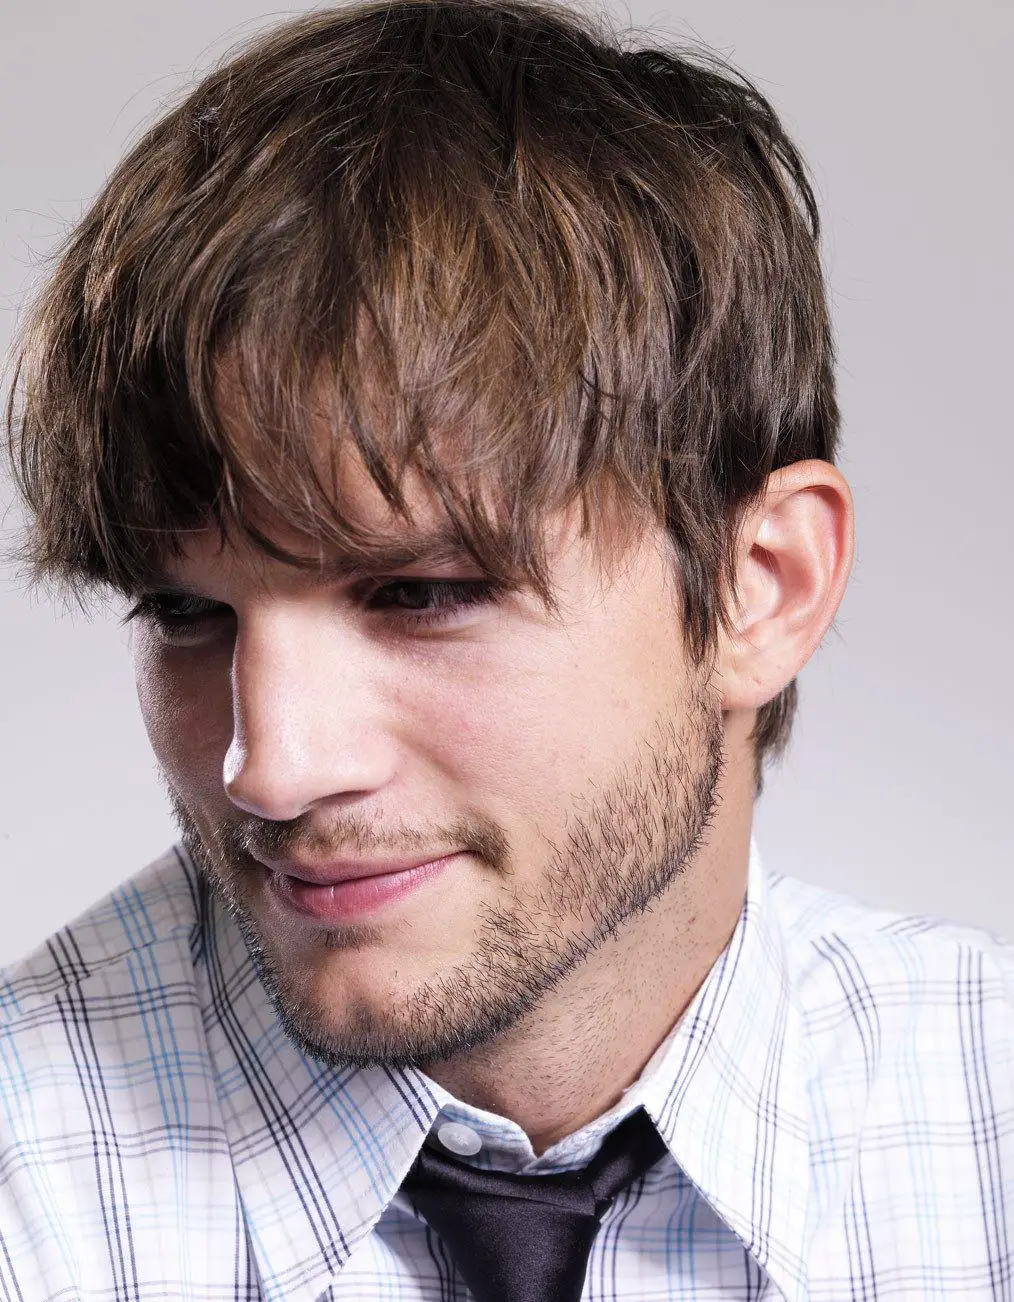 Celebrity Ashton Kutcher - Weight, Height and Age